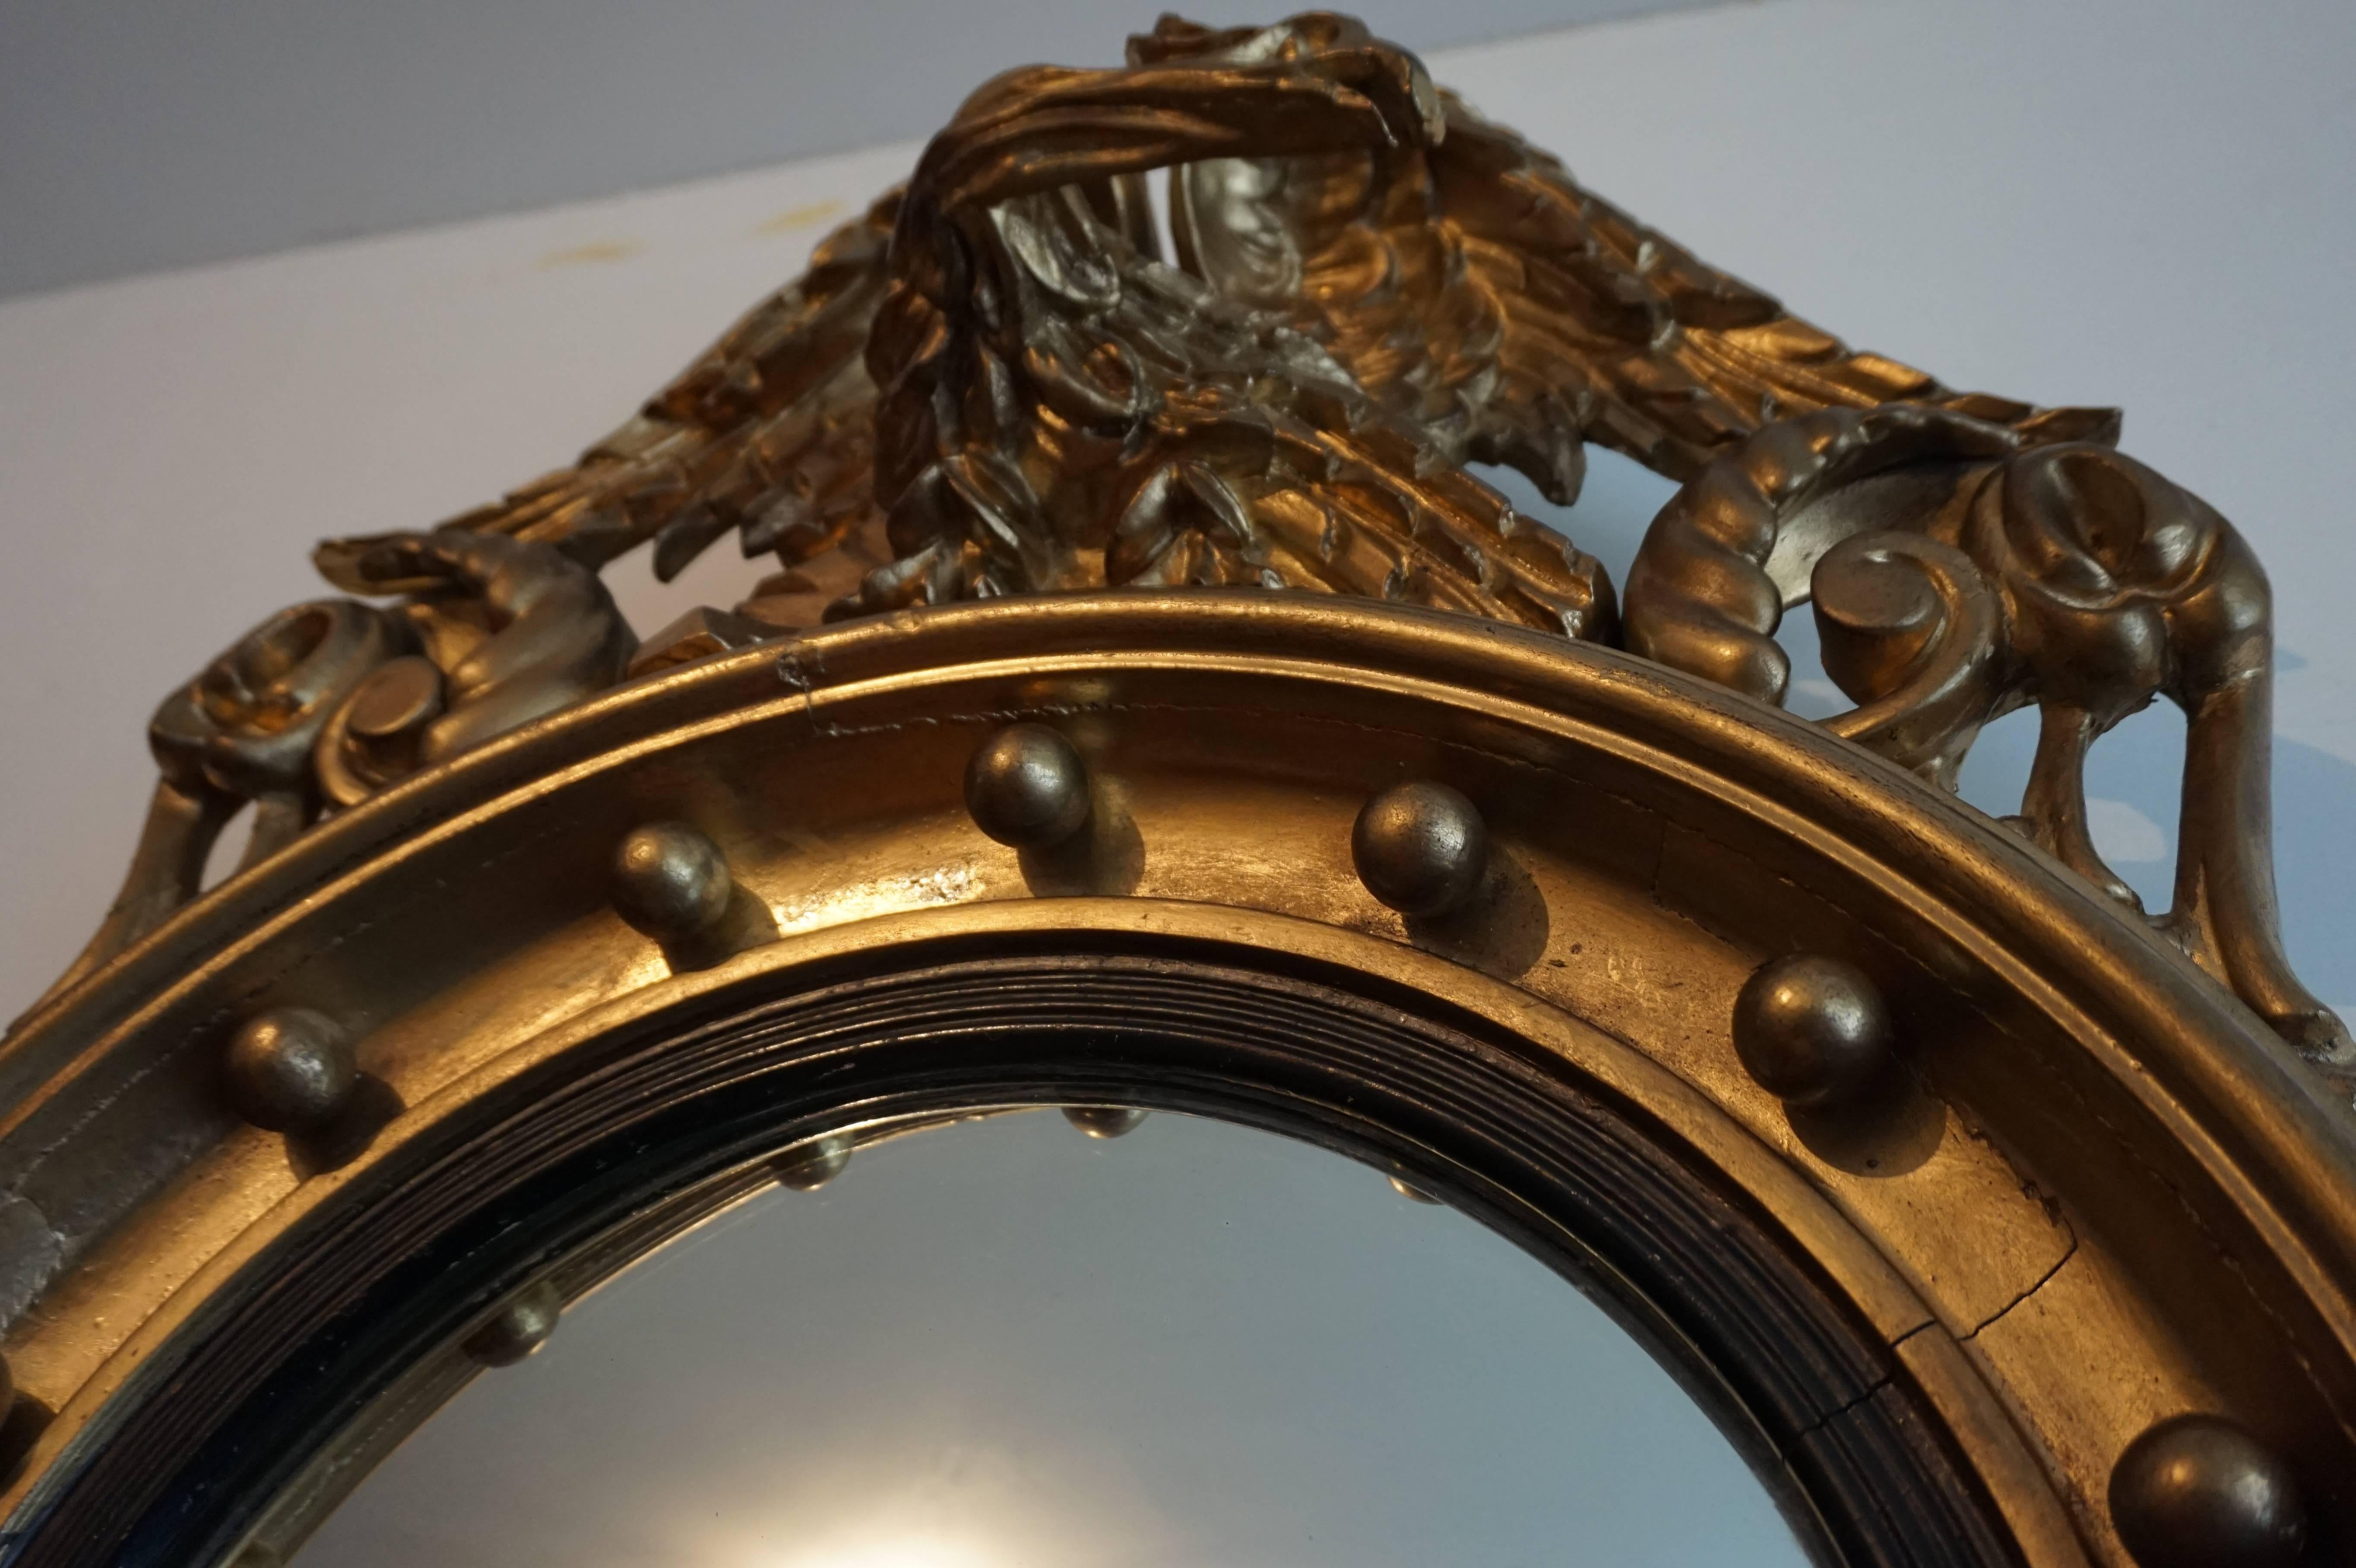 American Classical 19th Century Gilt Federal Style Convex Mirror or Butler Mirror with Carved Eagle